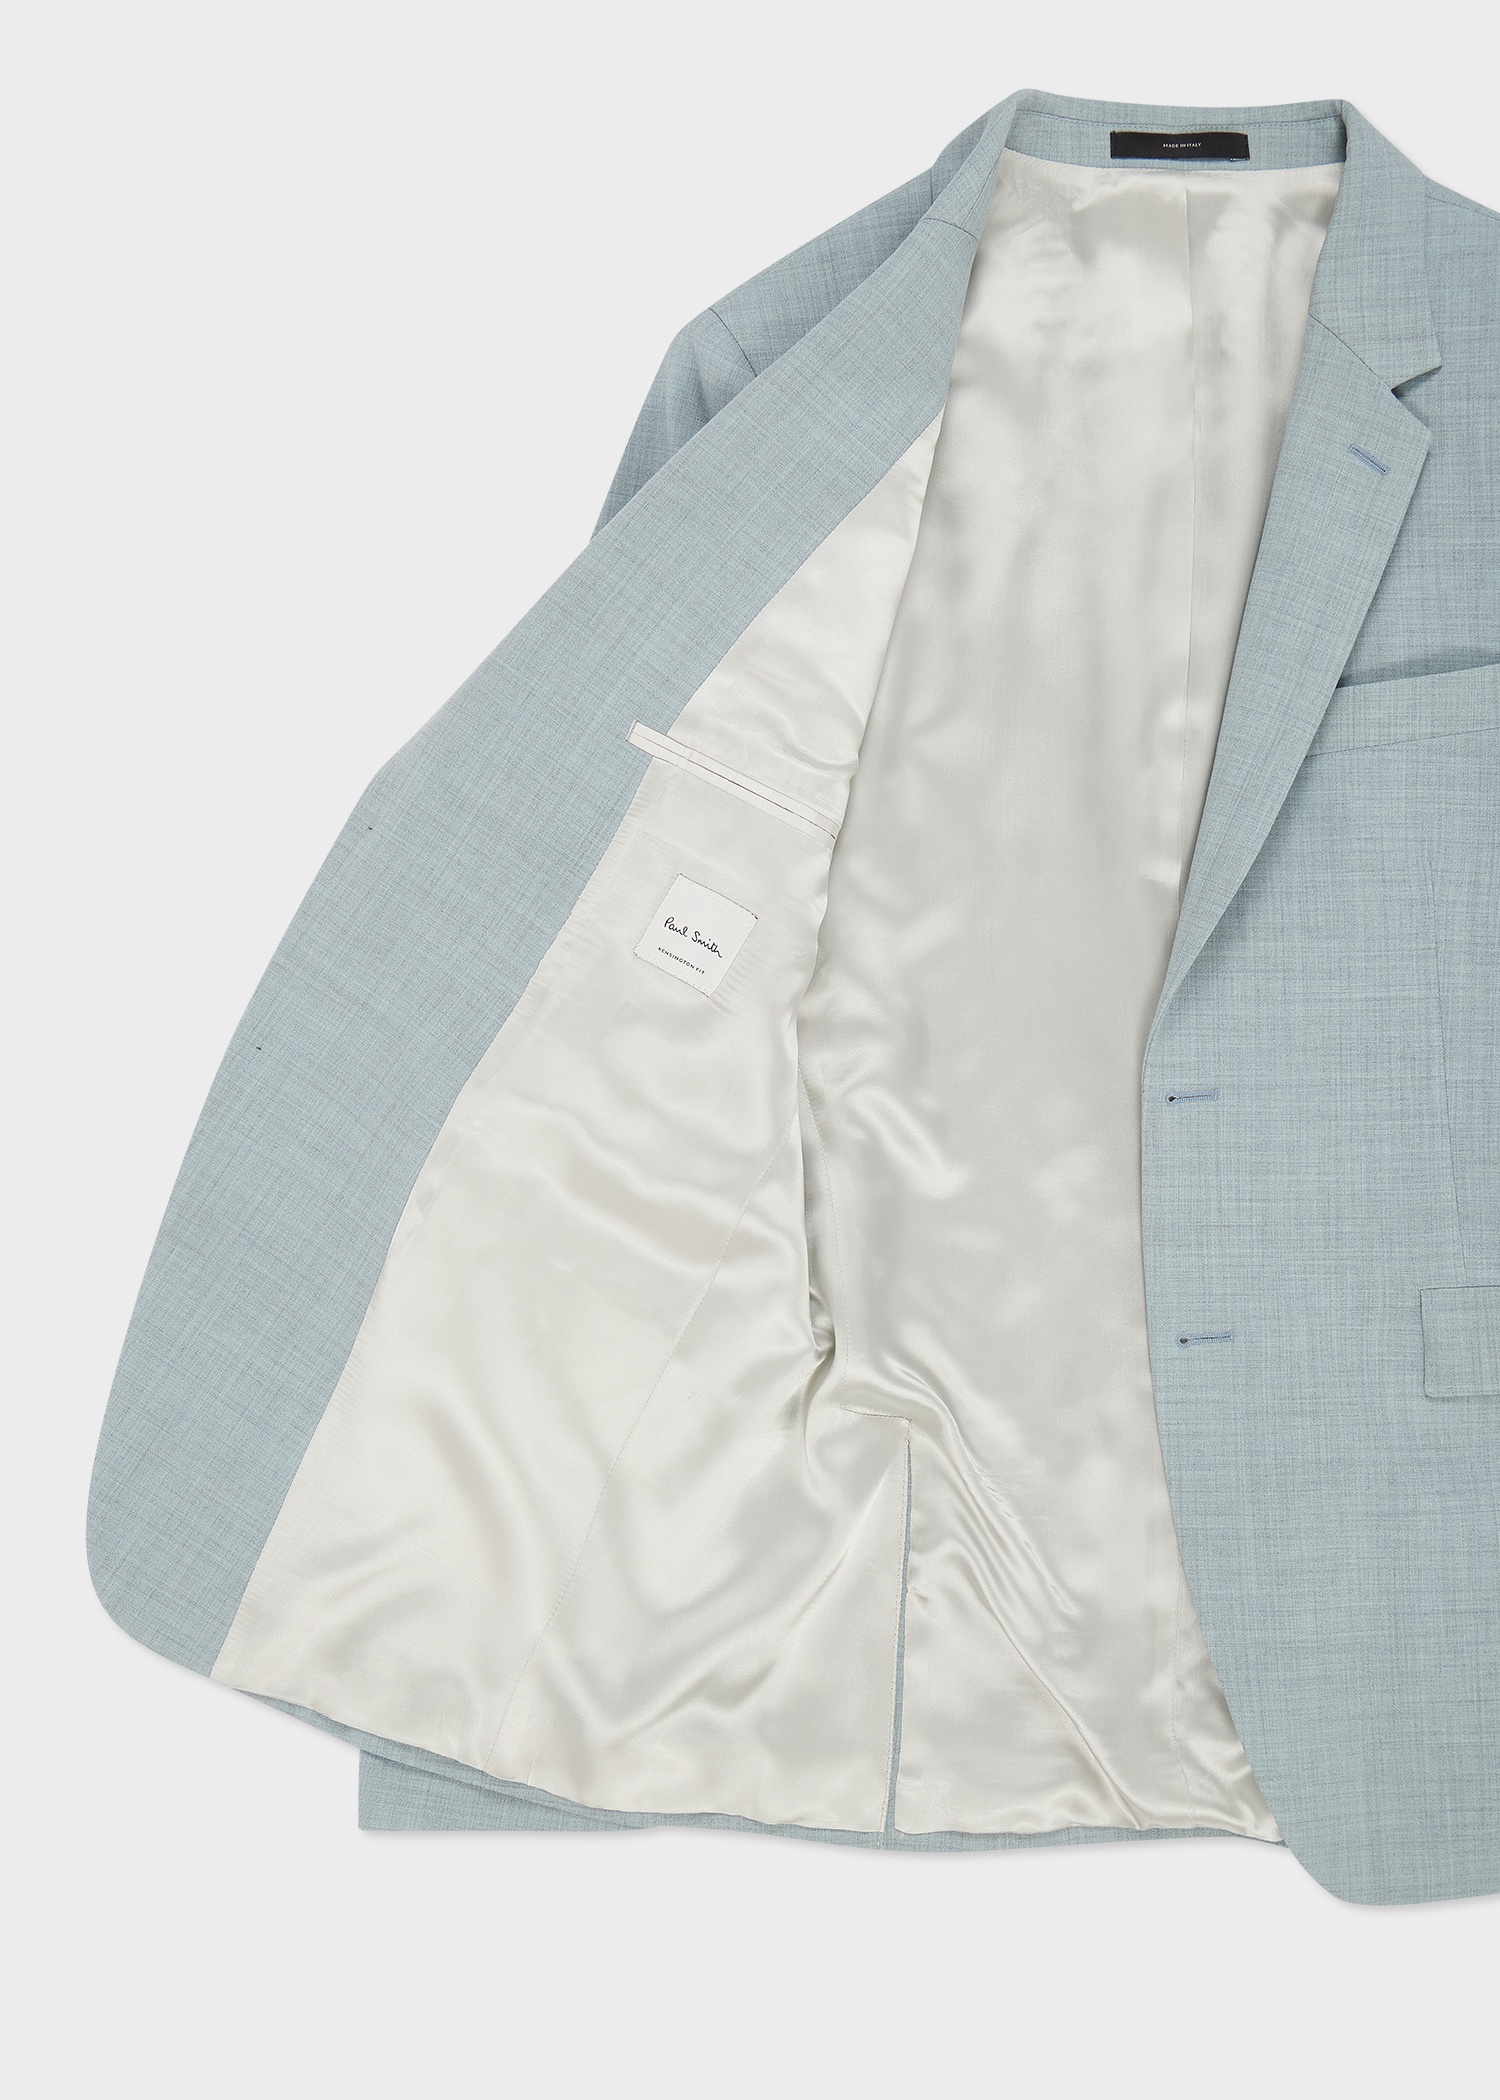 The Kensington - Light Blue Marl Overdyed Stretch-Wool Suit - 6